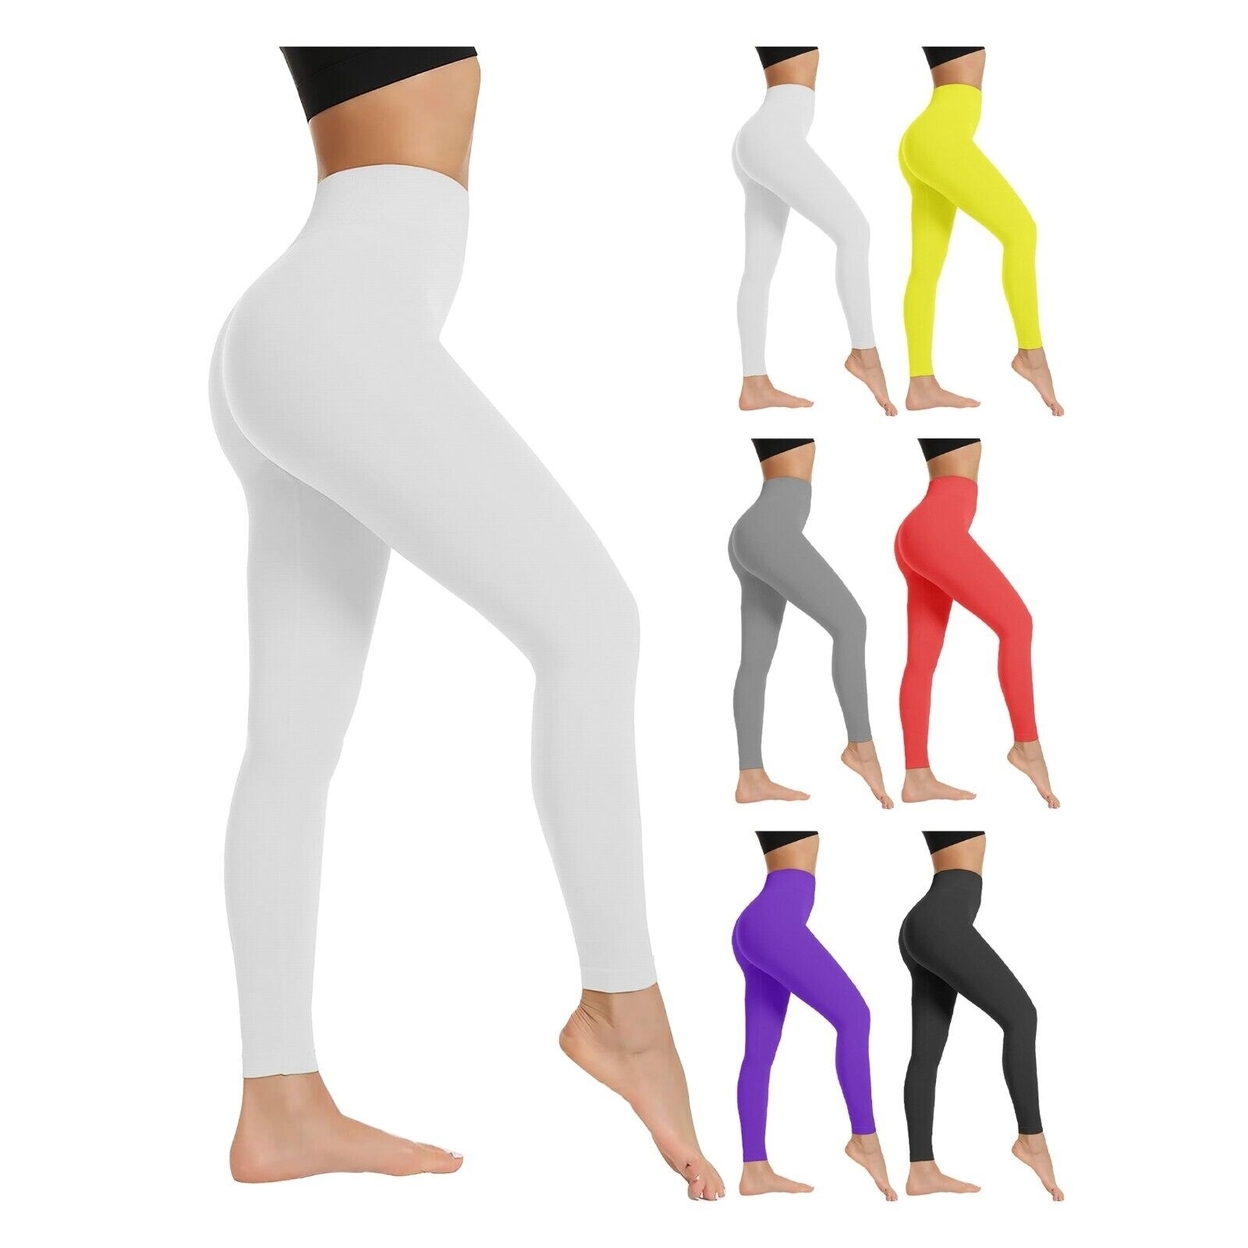 Women's High Waist Super-Soft Active Athlete Stretch Yoga Cozy Leggings - Red, Small